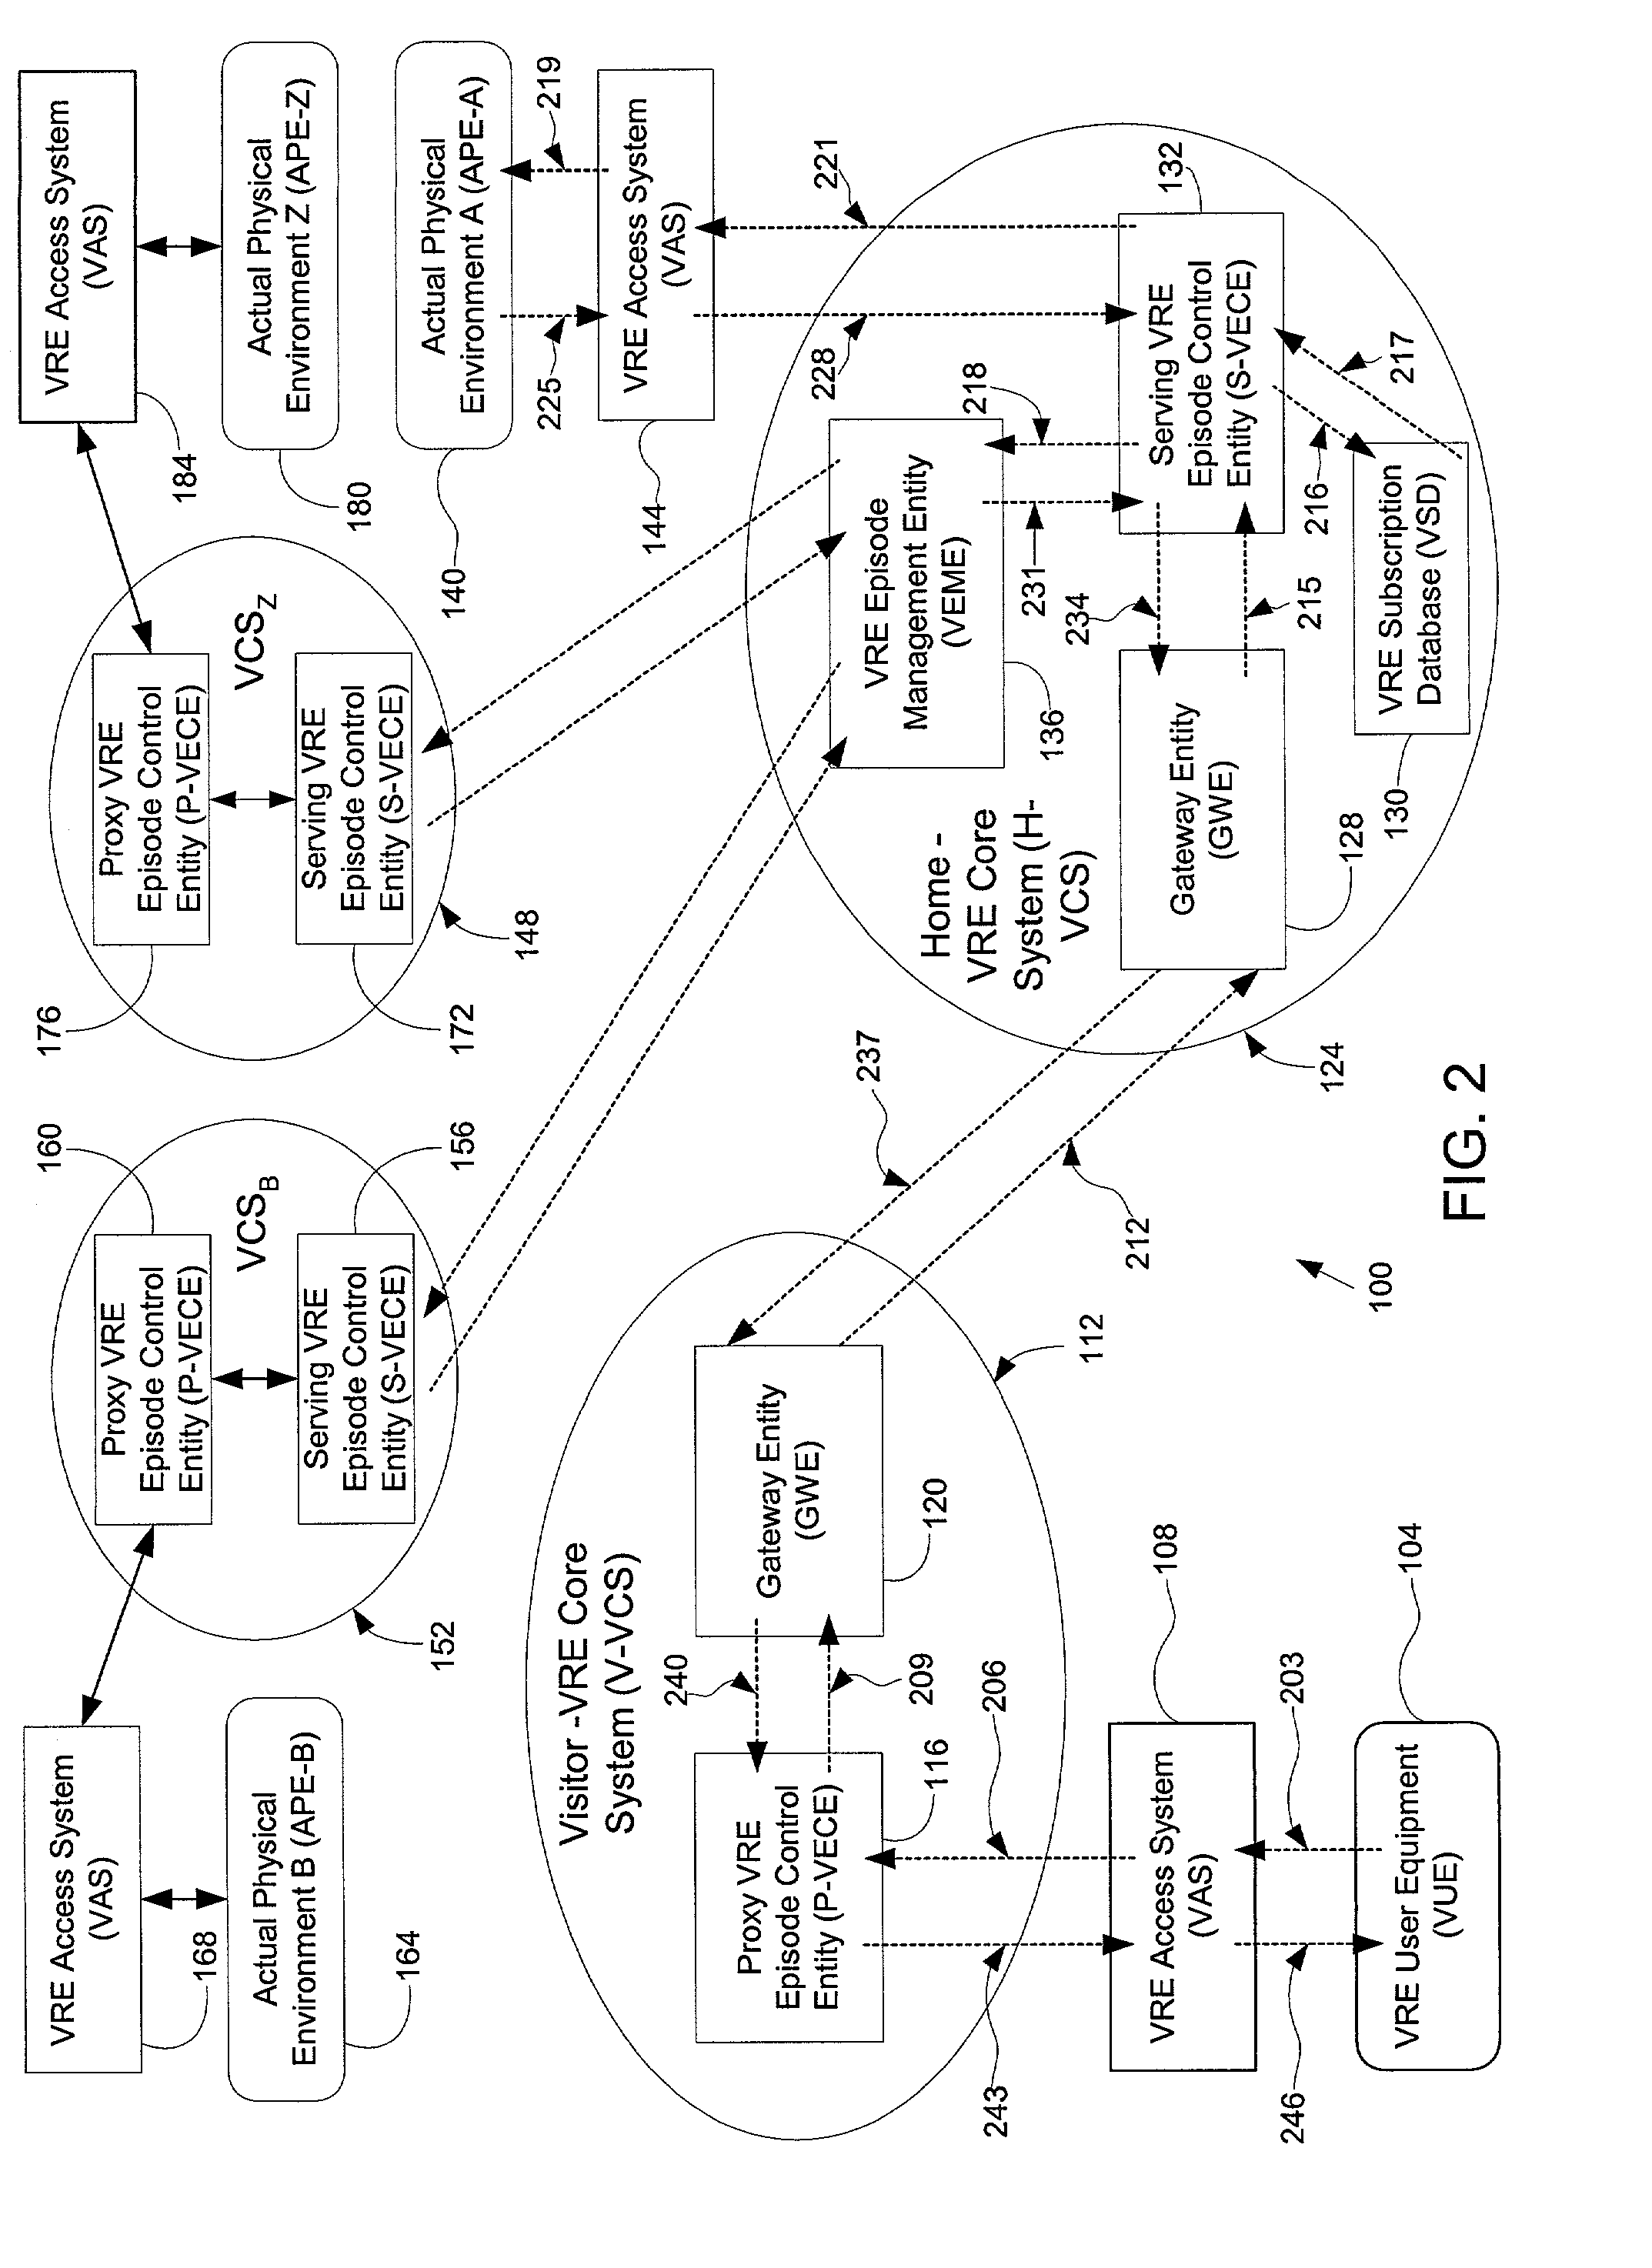 Virtual reality systems and methods